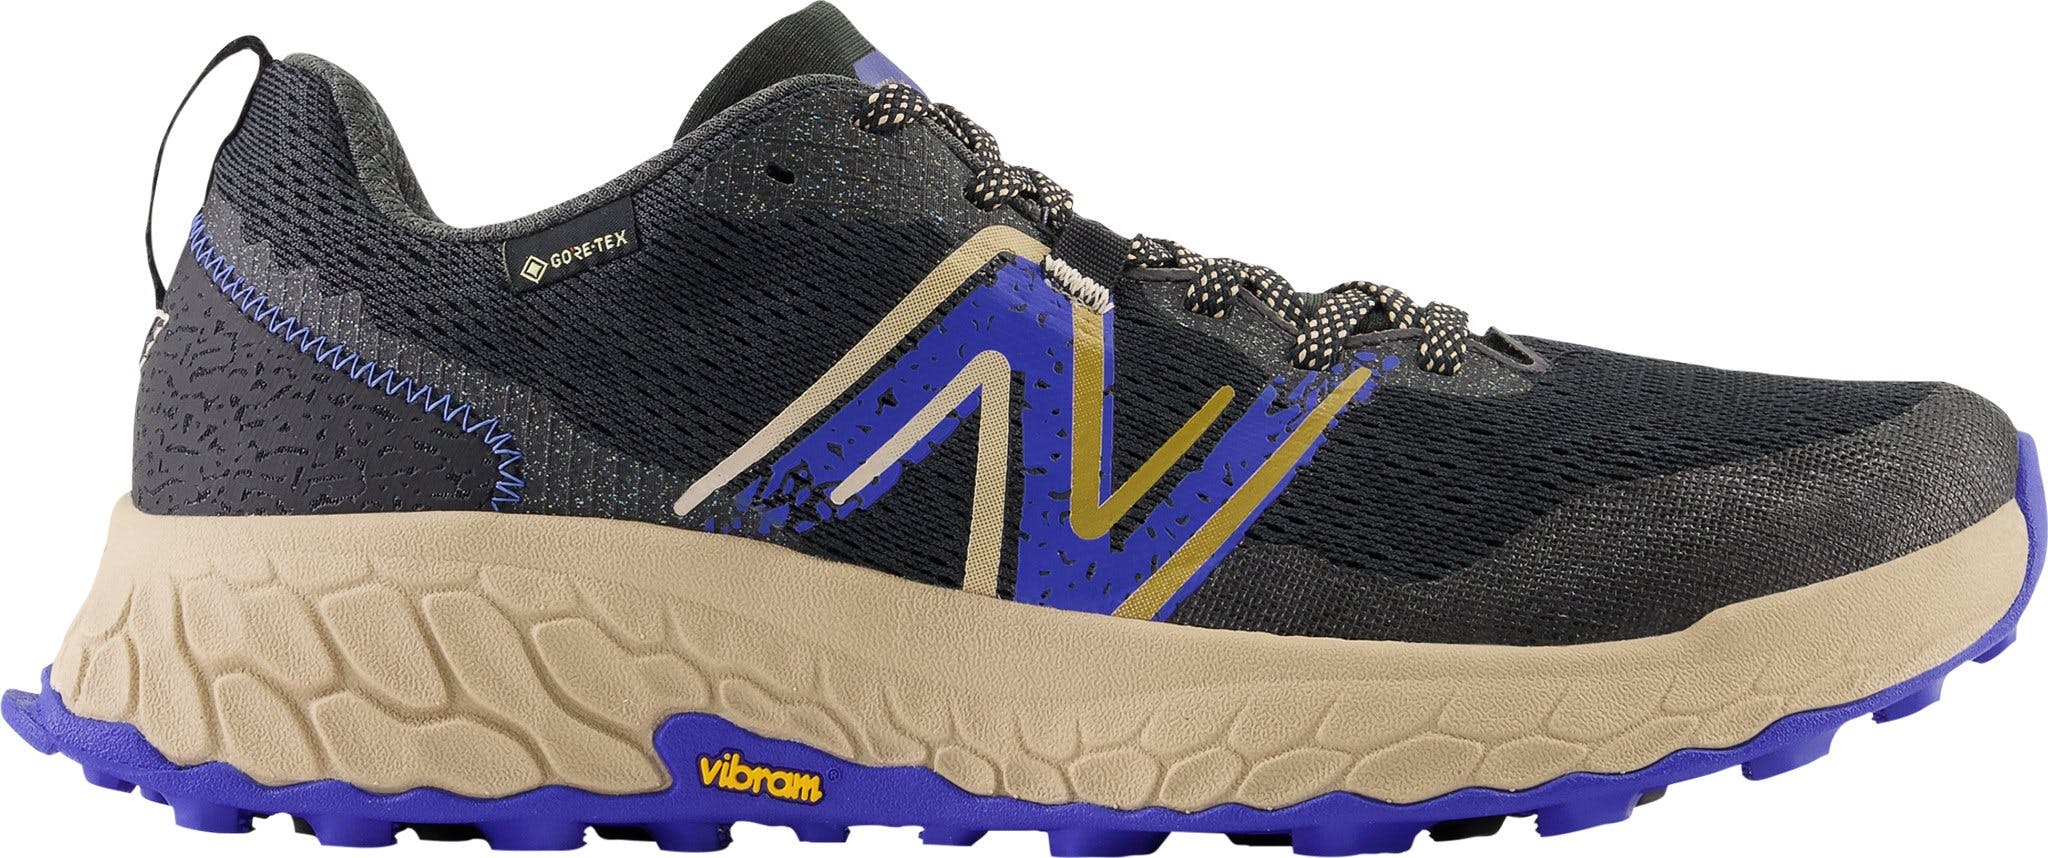 Product image for Fresh Foam x Hierro v7 GORE-TEX Shoes [Wide] - Men's